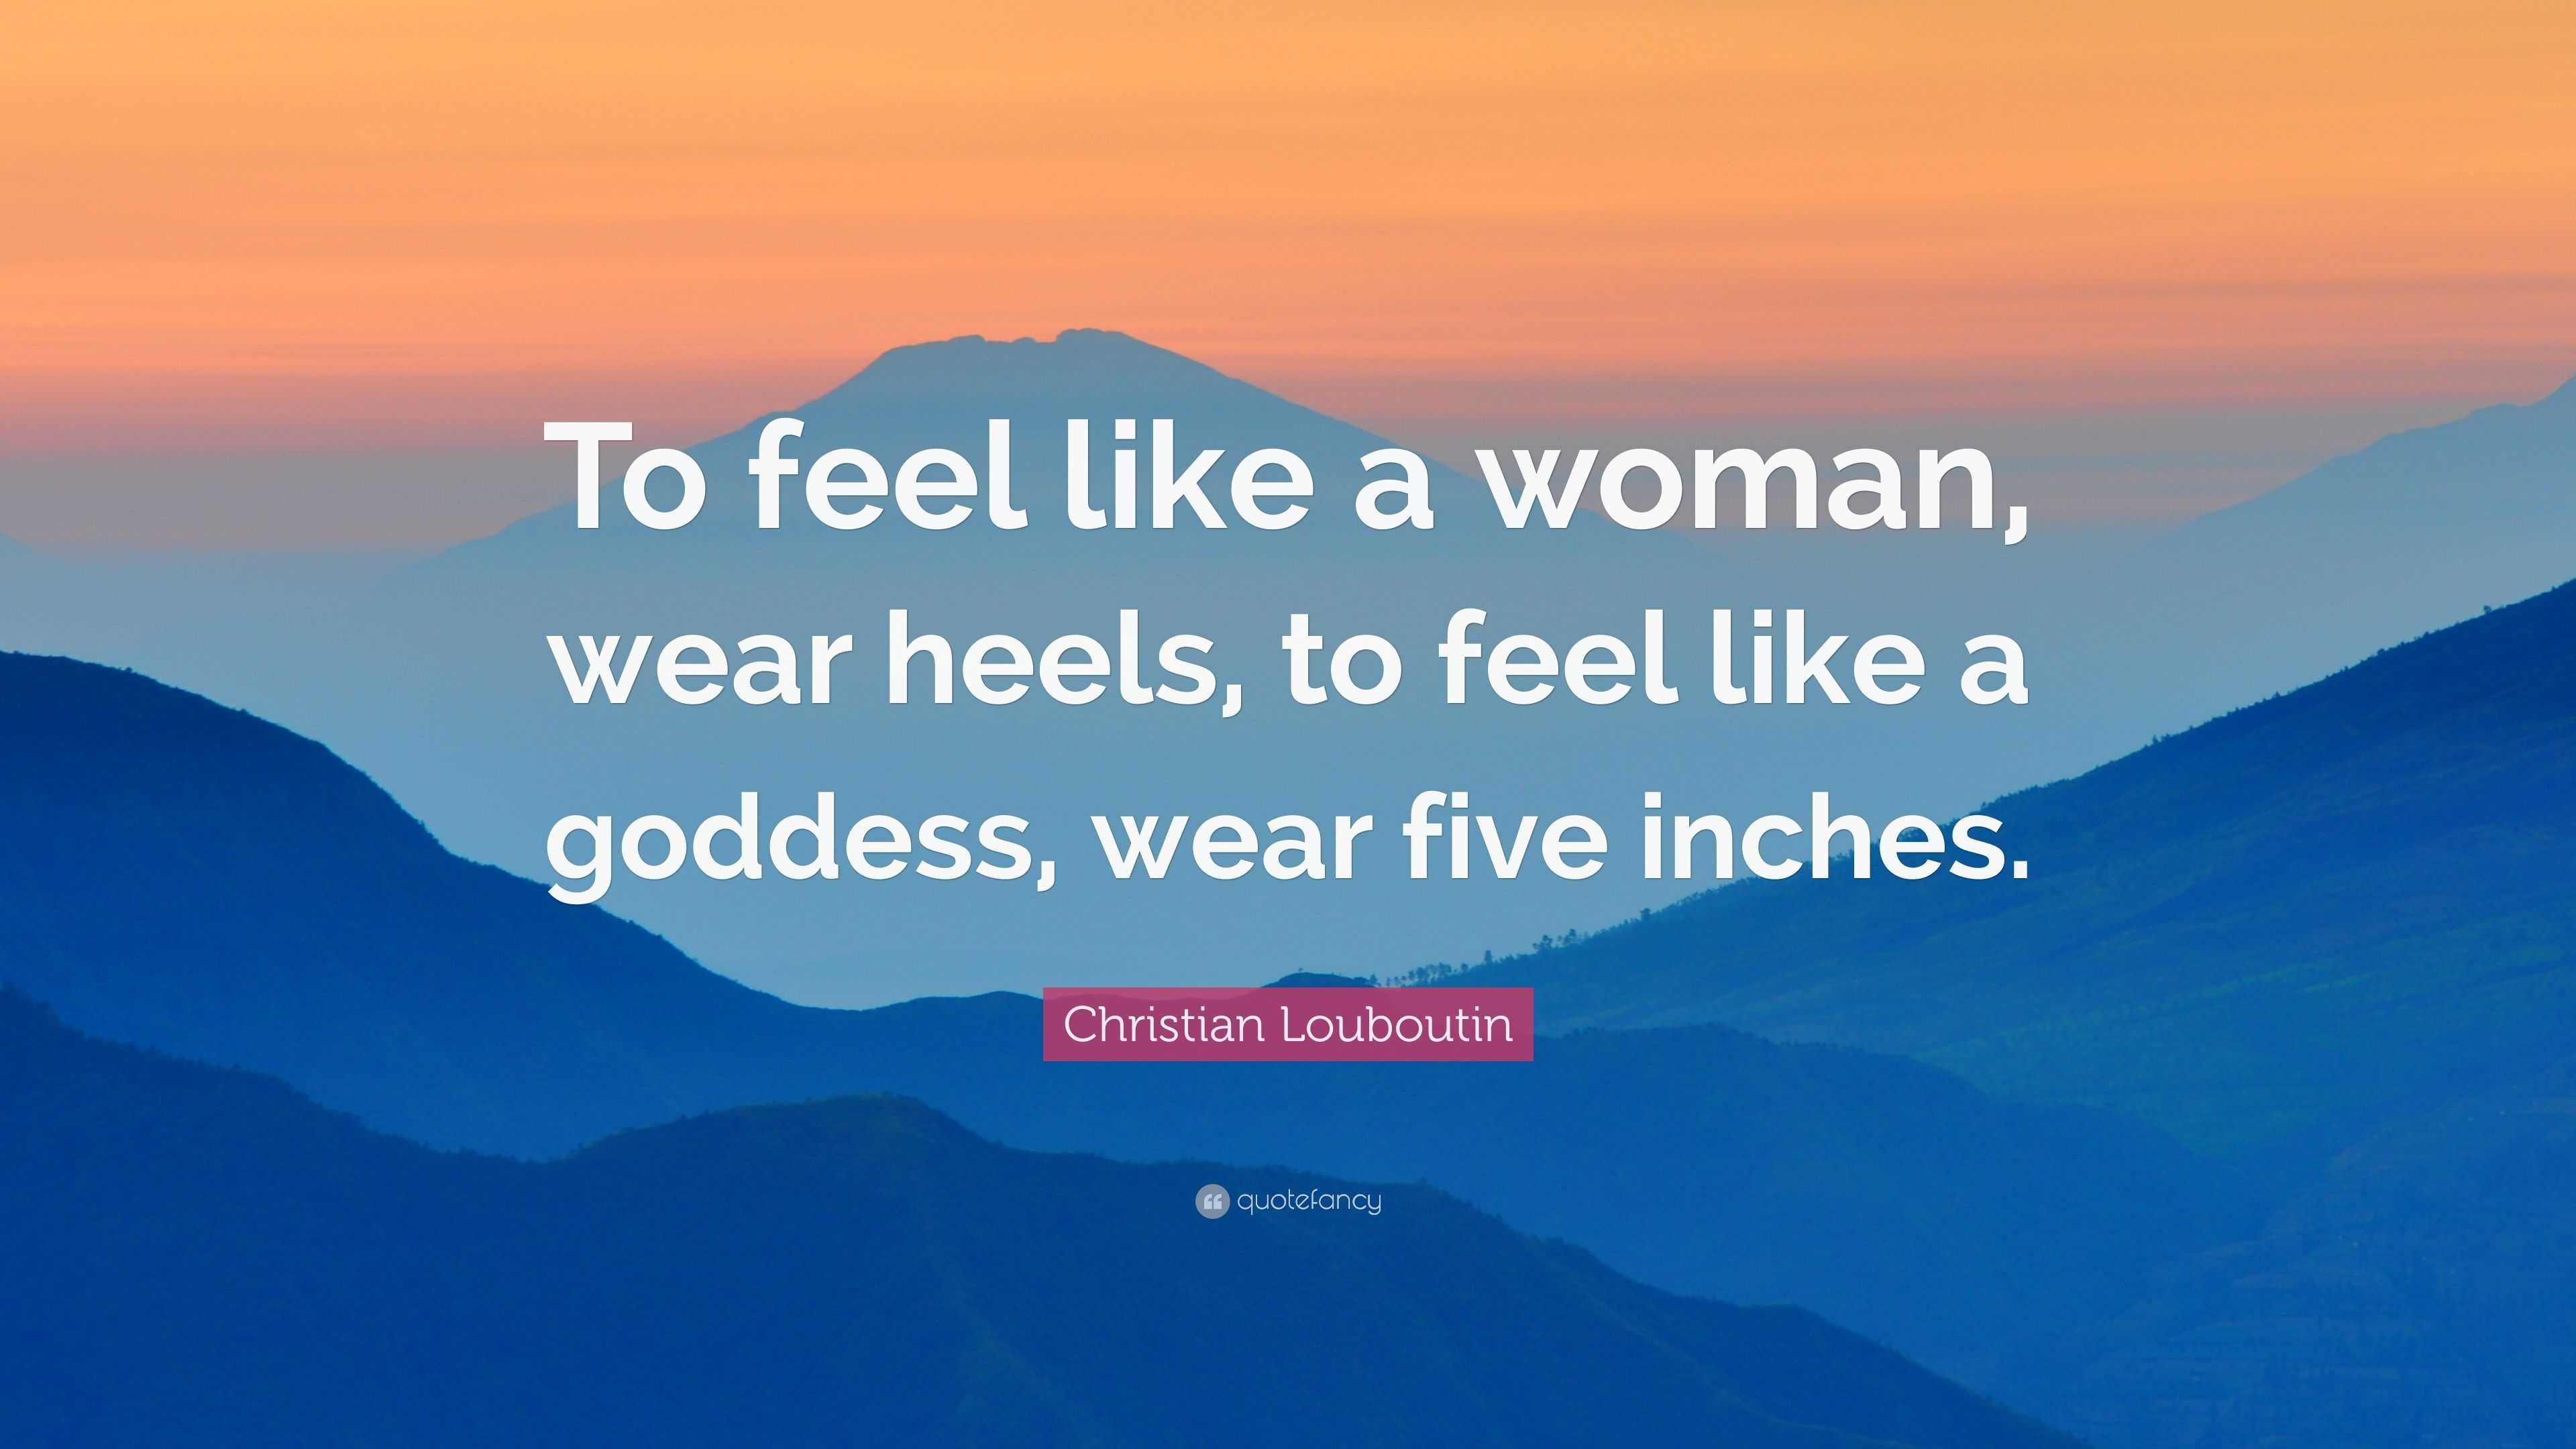 Christian Louboutin Quote: “To feel like a woman, wear heels, to feel ...